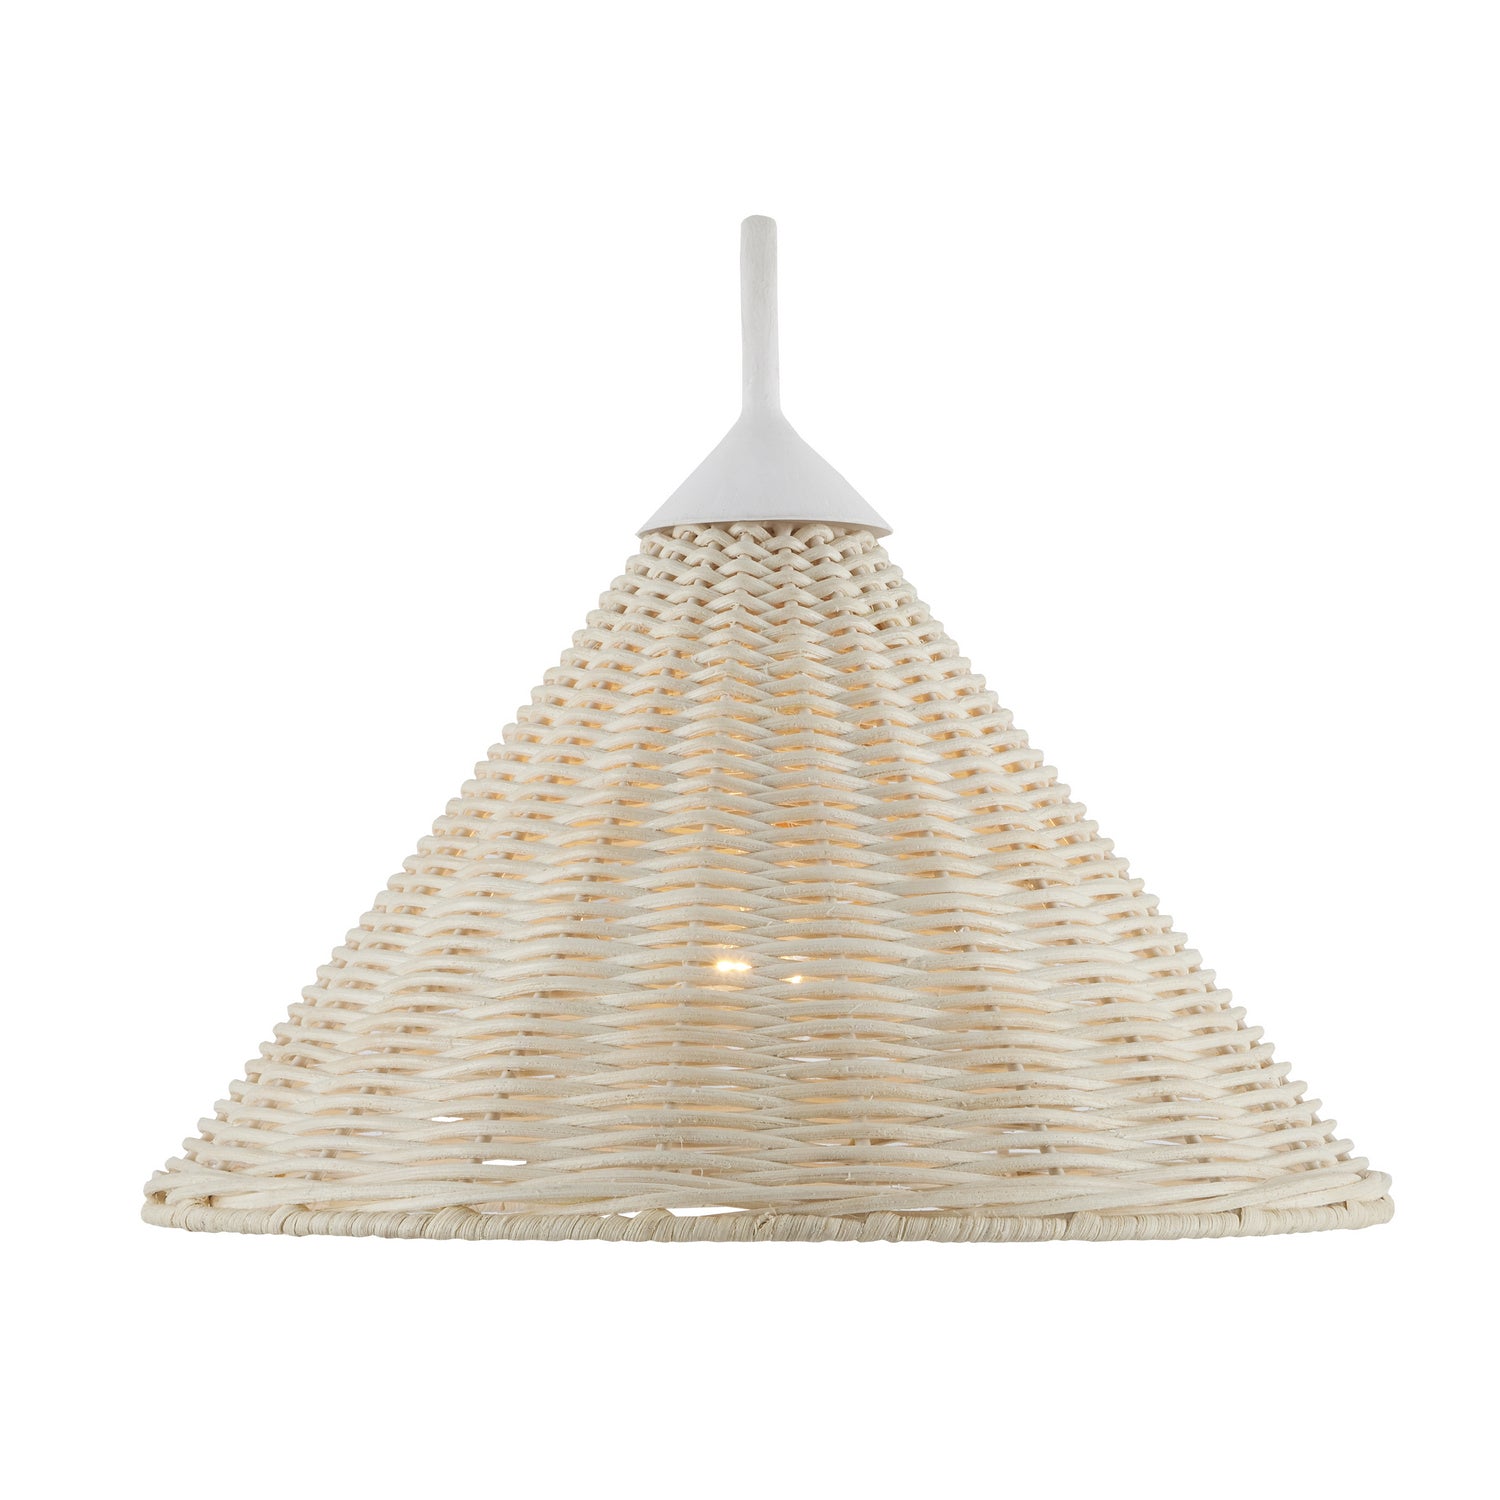 One Light Wall Sconce from the Basket collection in Gesso White/Bleached White finish